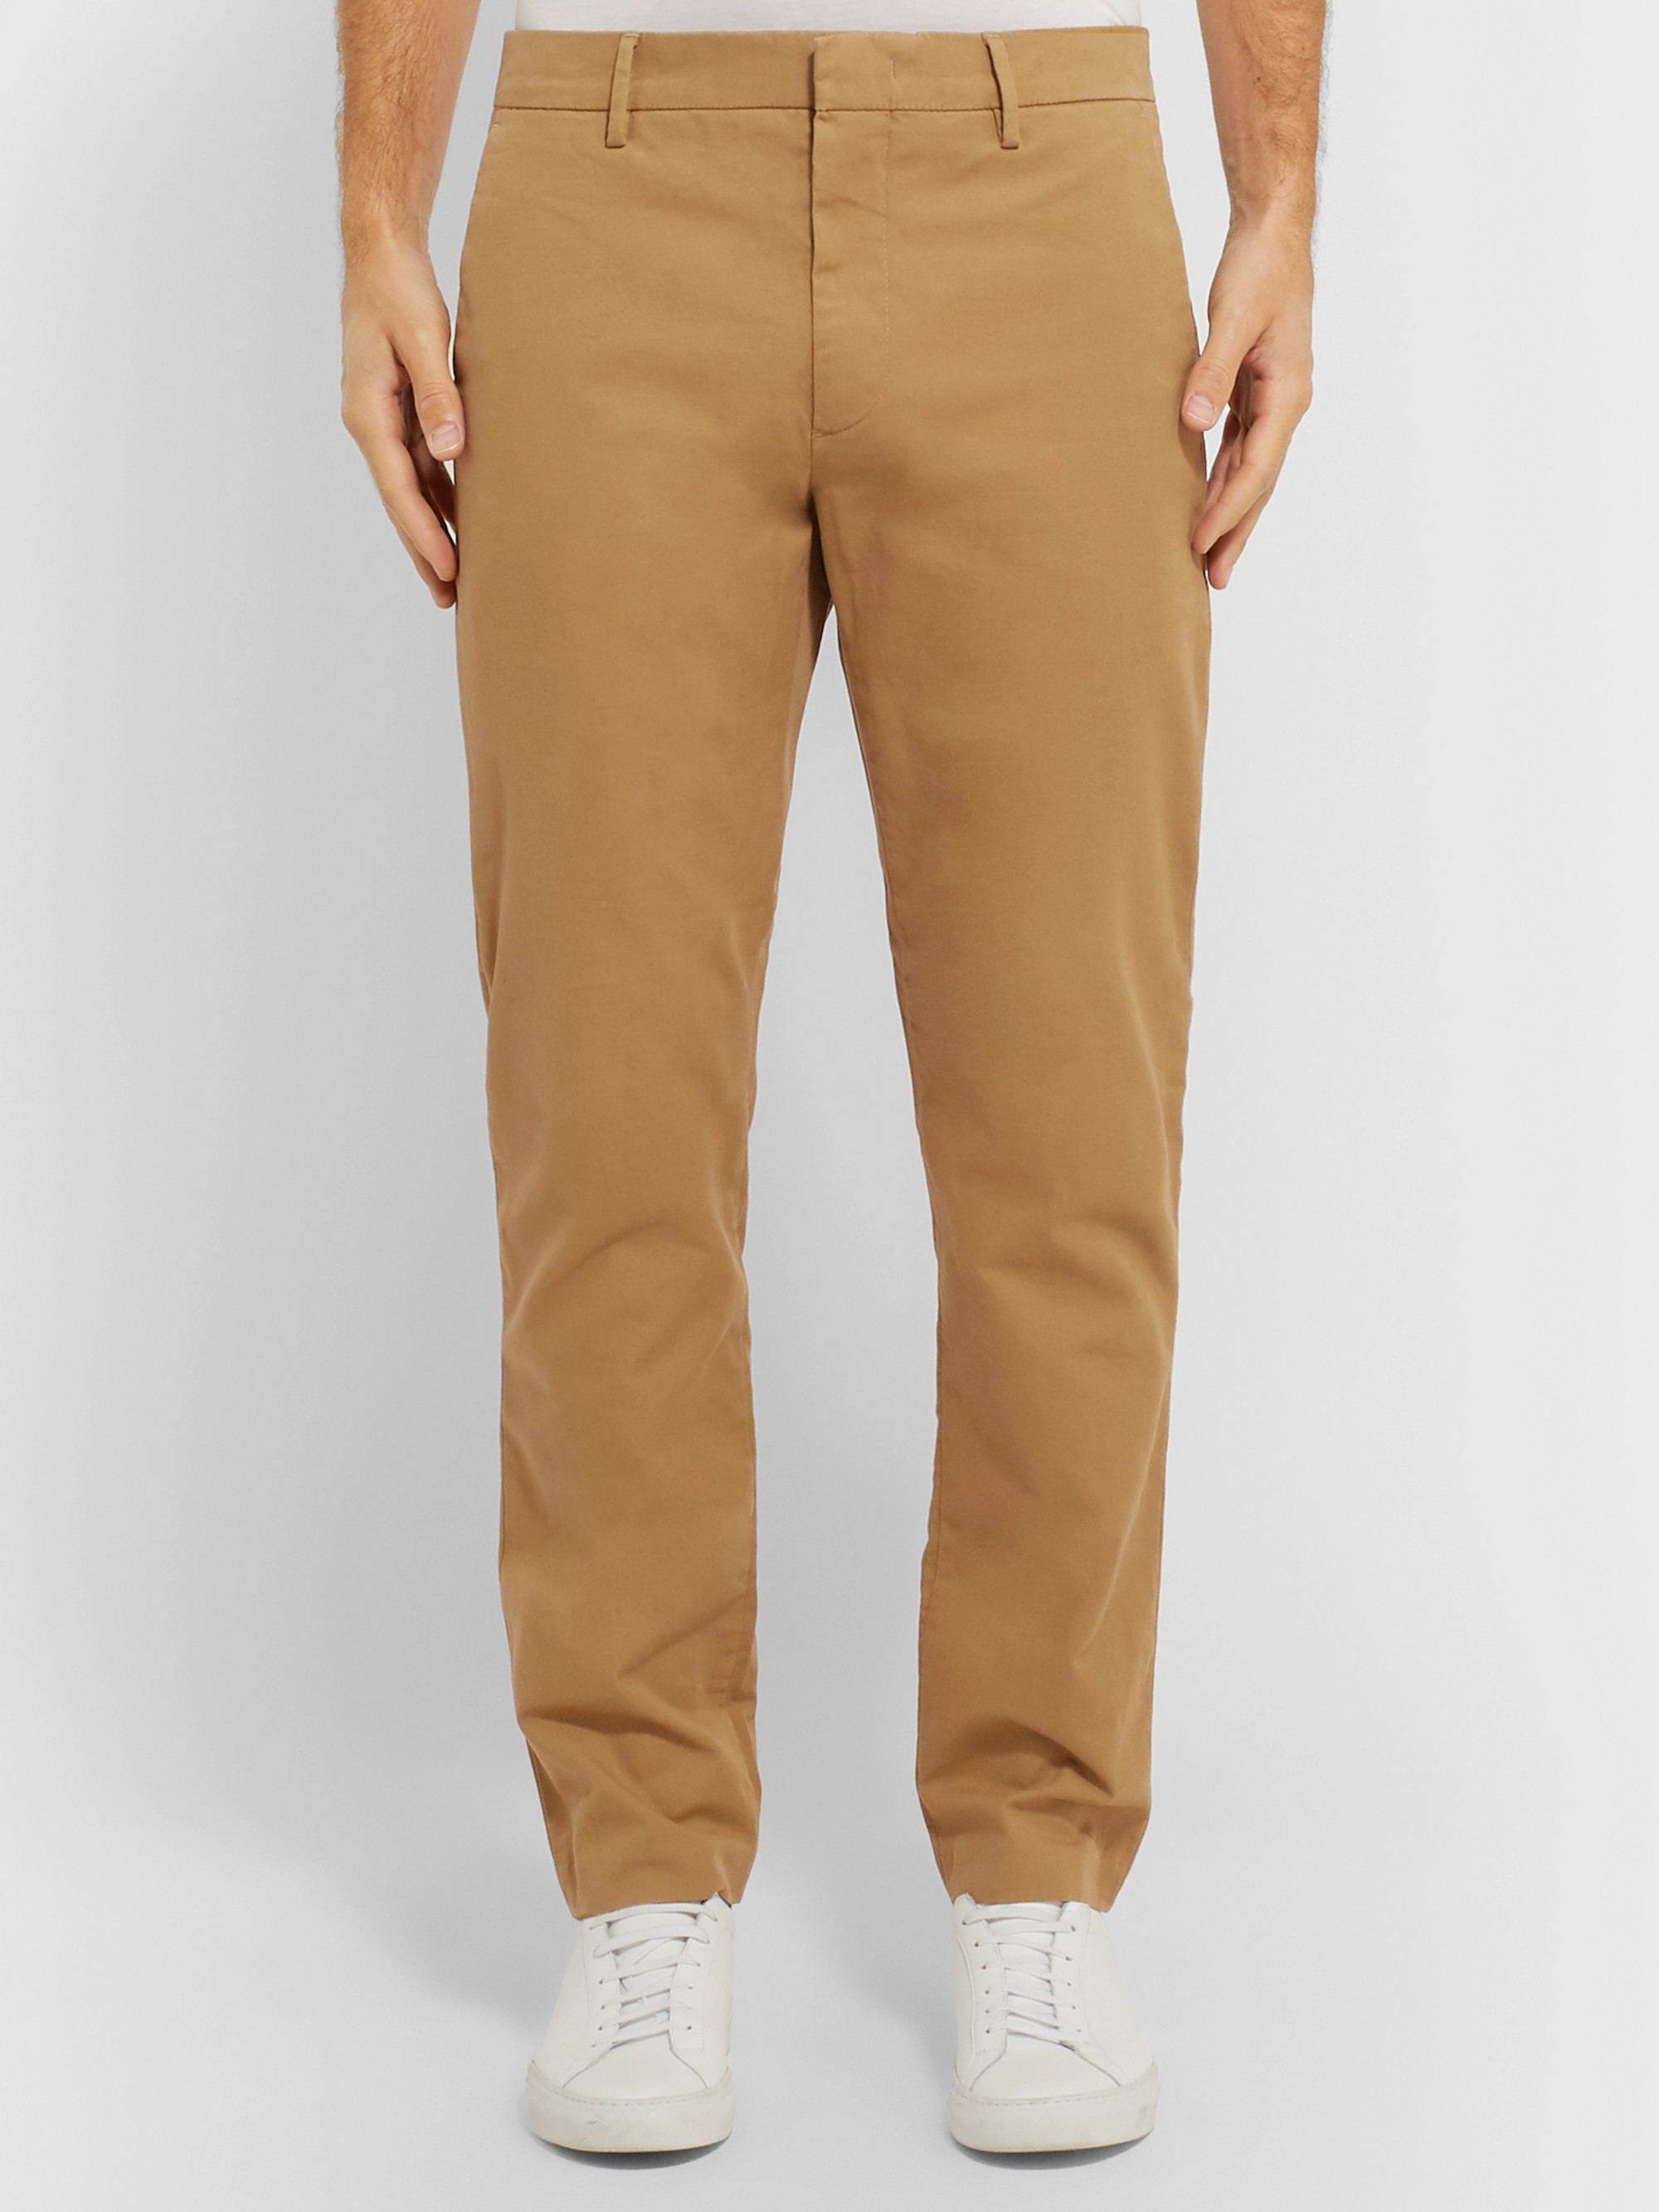 best chinos for men